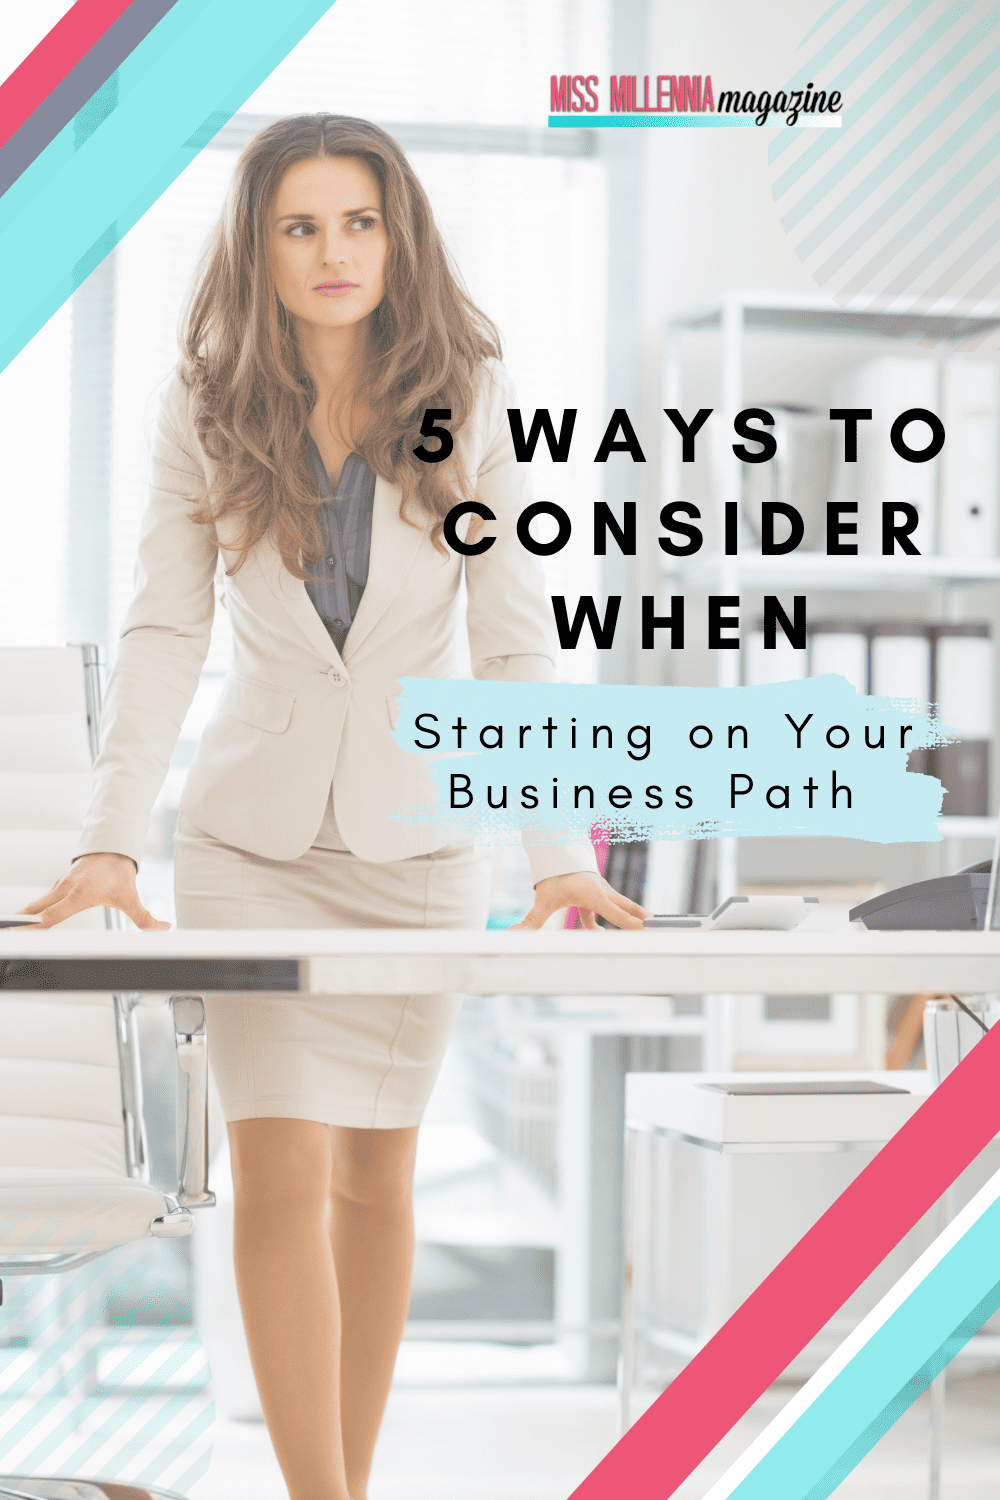 5 Ways to Consider when Starting on Your Business Path